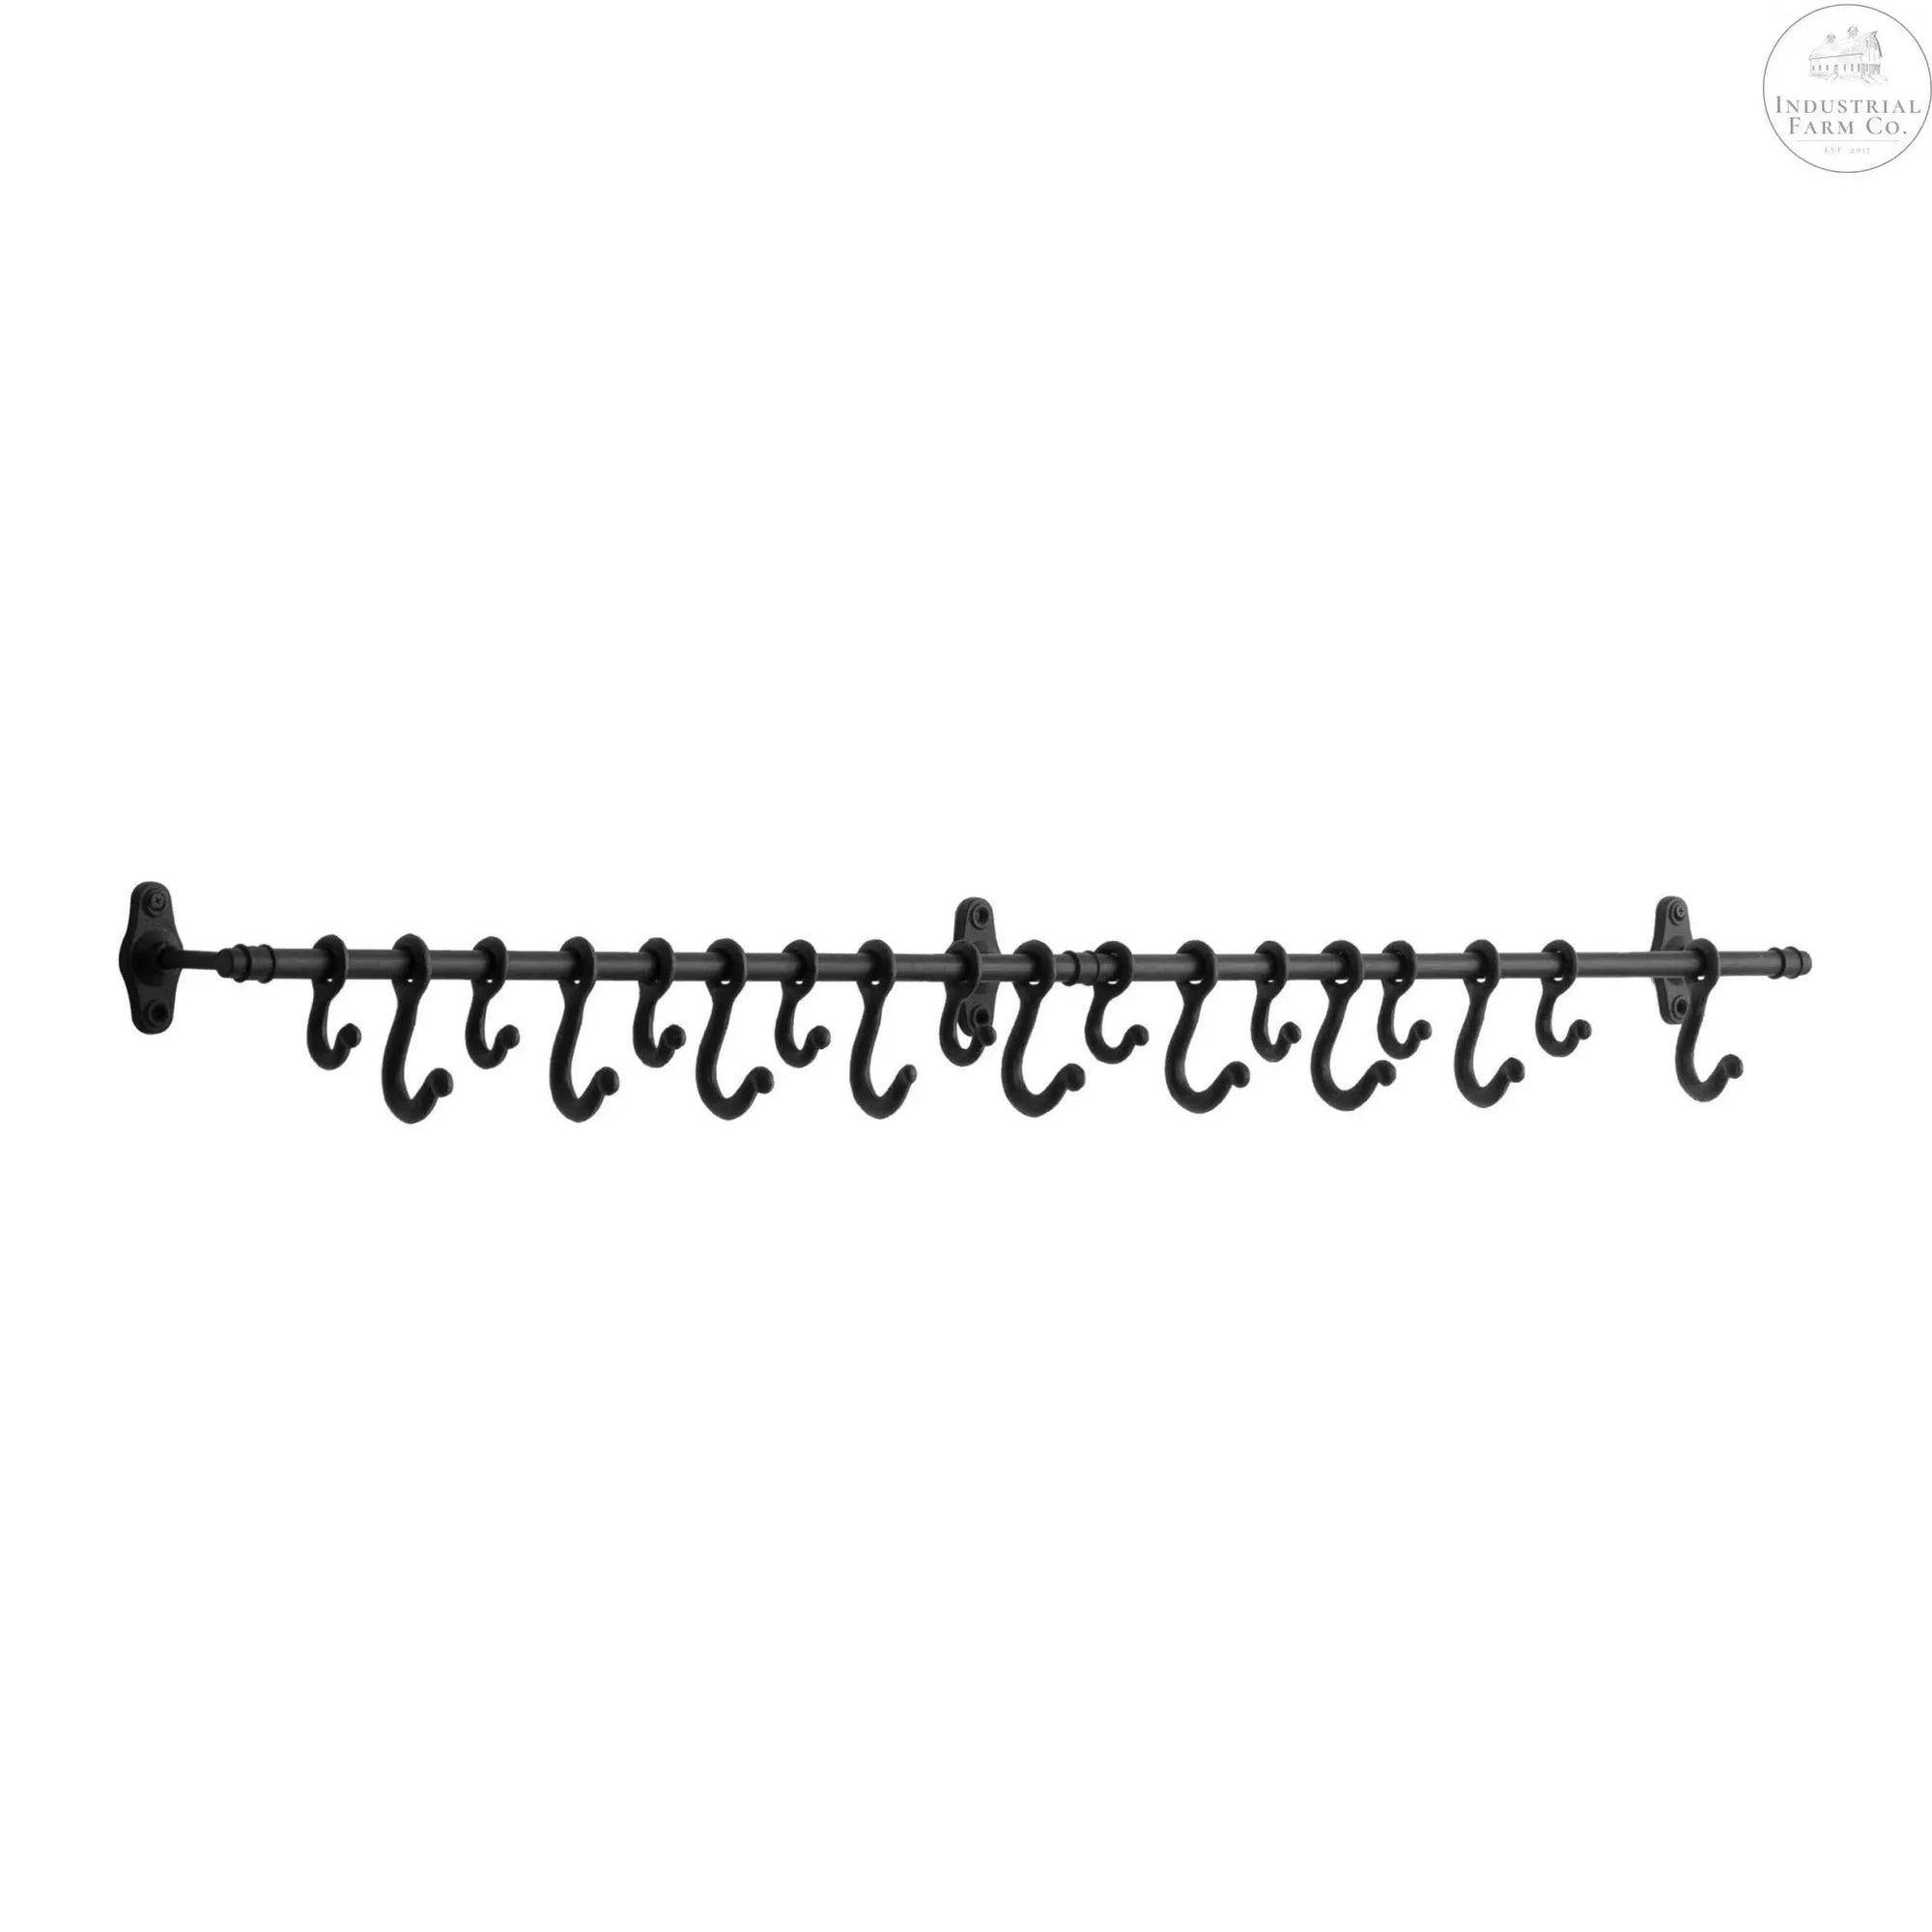 Forged Metal Wall Rod with Hooks  Default Title   | Industrial Farm Co